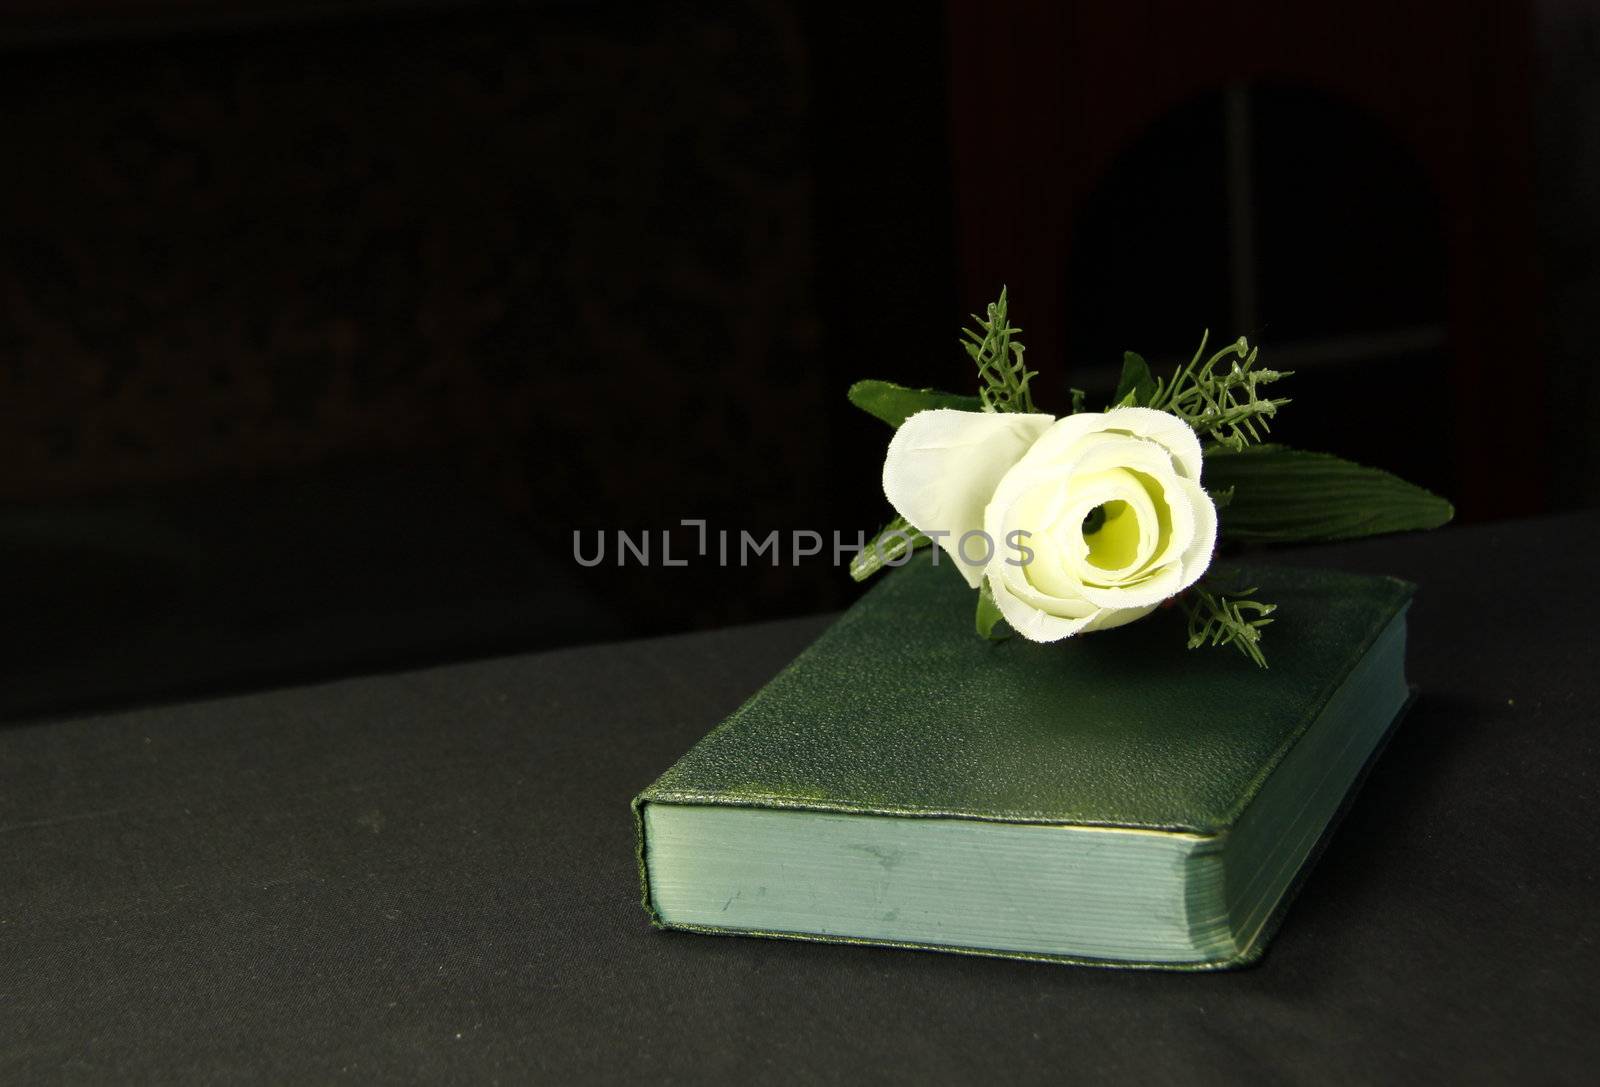 a rose next to a book depicting it could be a romantic novel